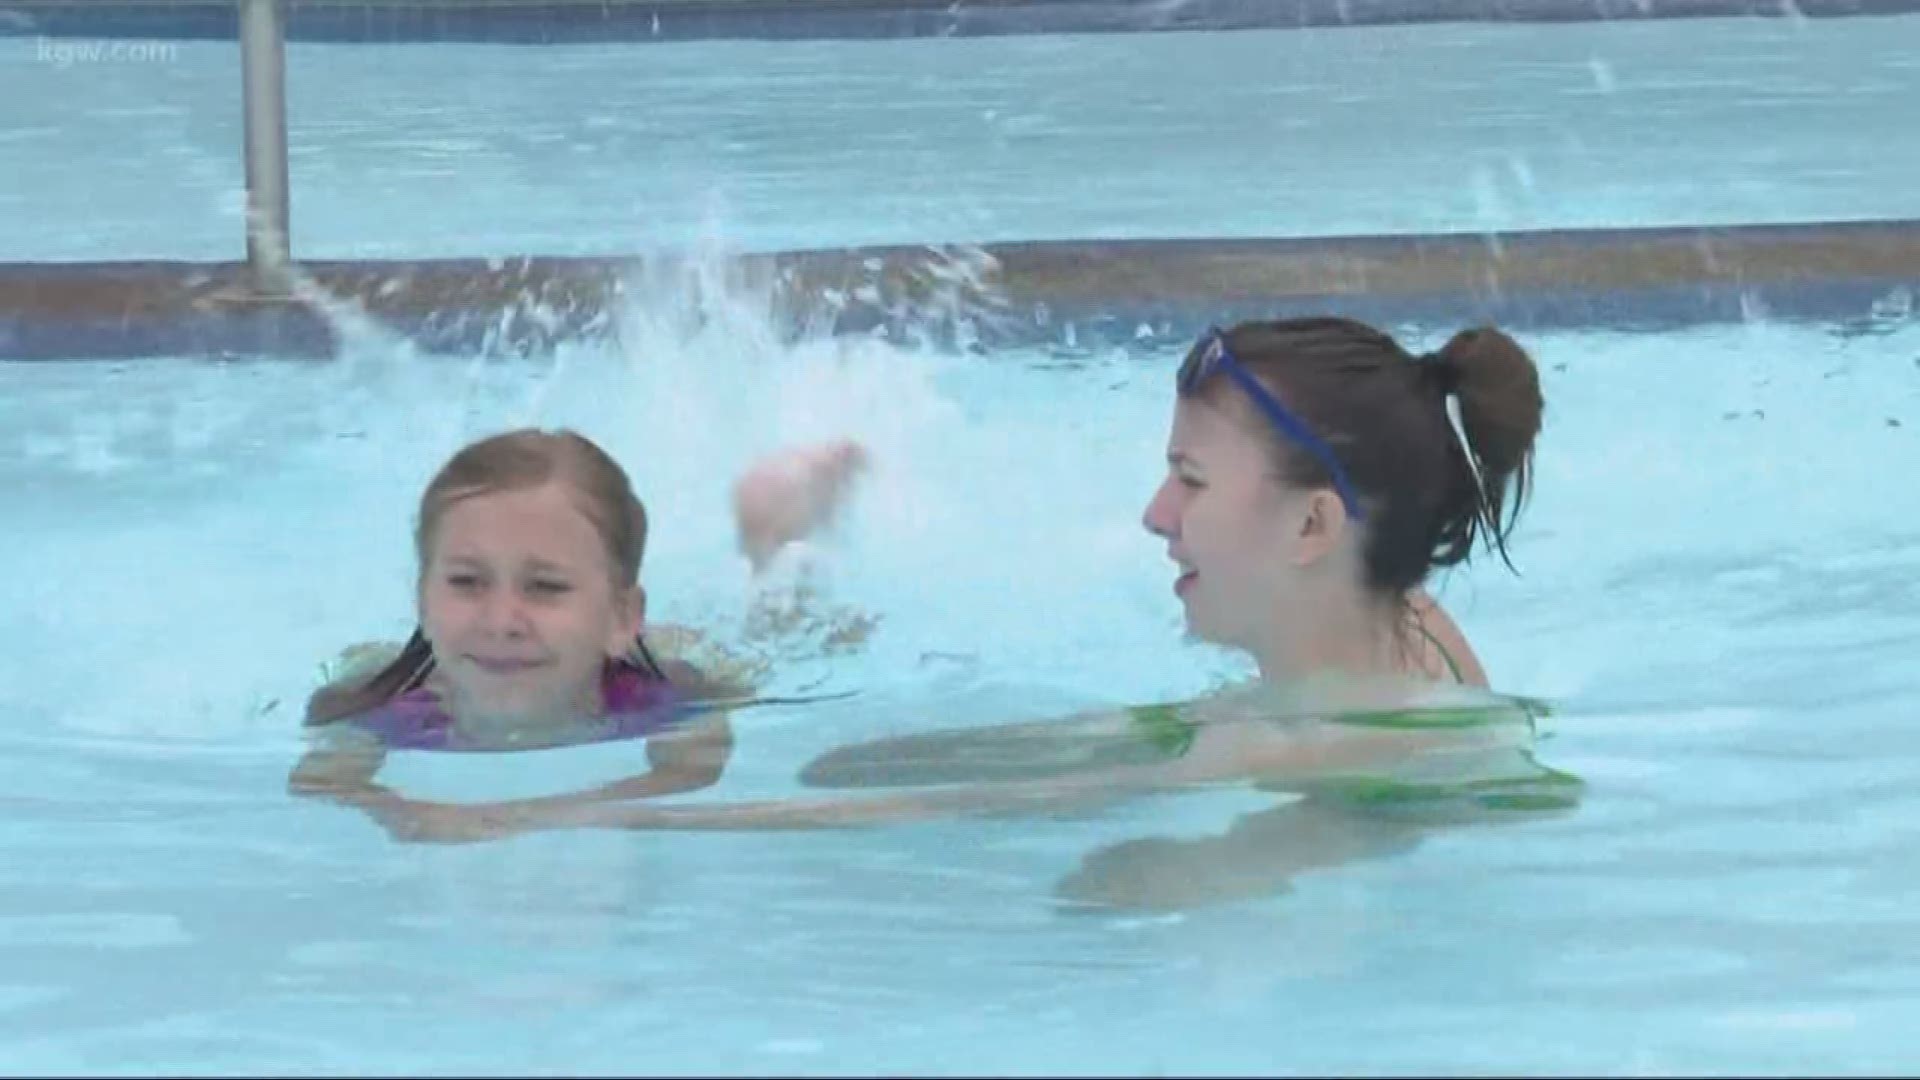 Swimmers were waiting in line Tuesday morning for the opening day of outdoor pools. KGW's Christine Pitawanich visited the Grant and Wilson High pools.